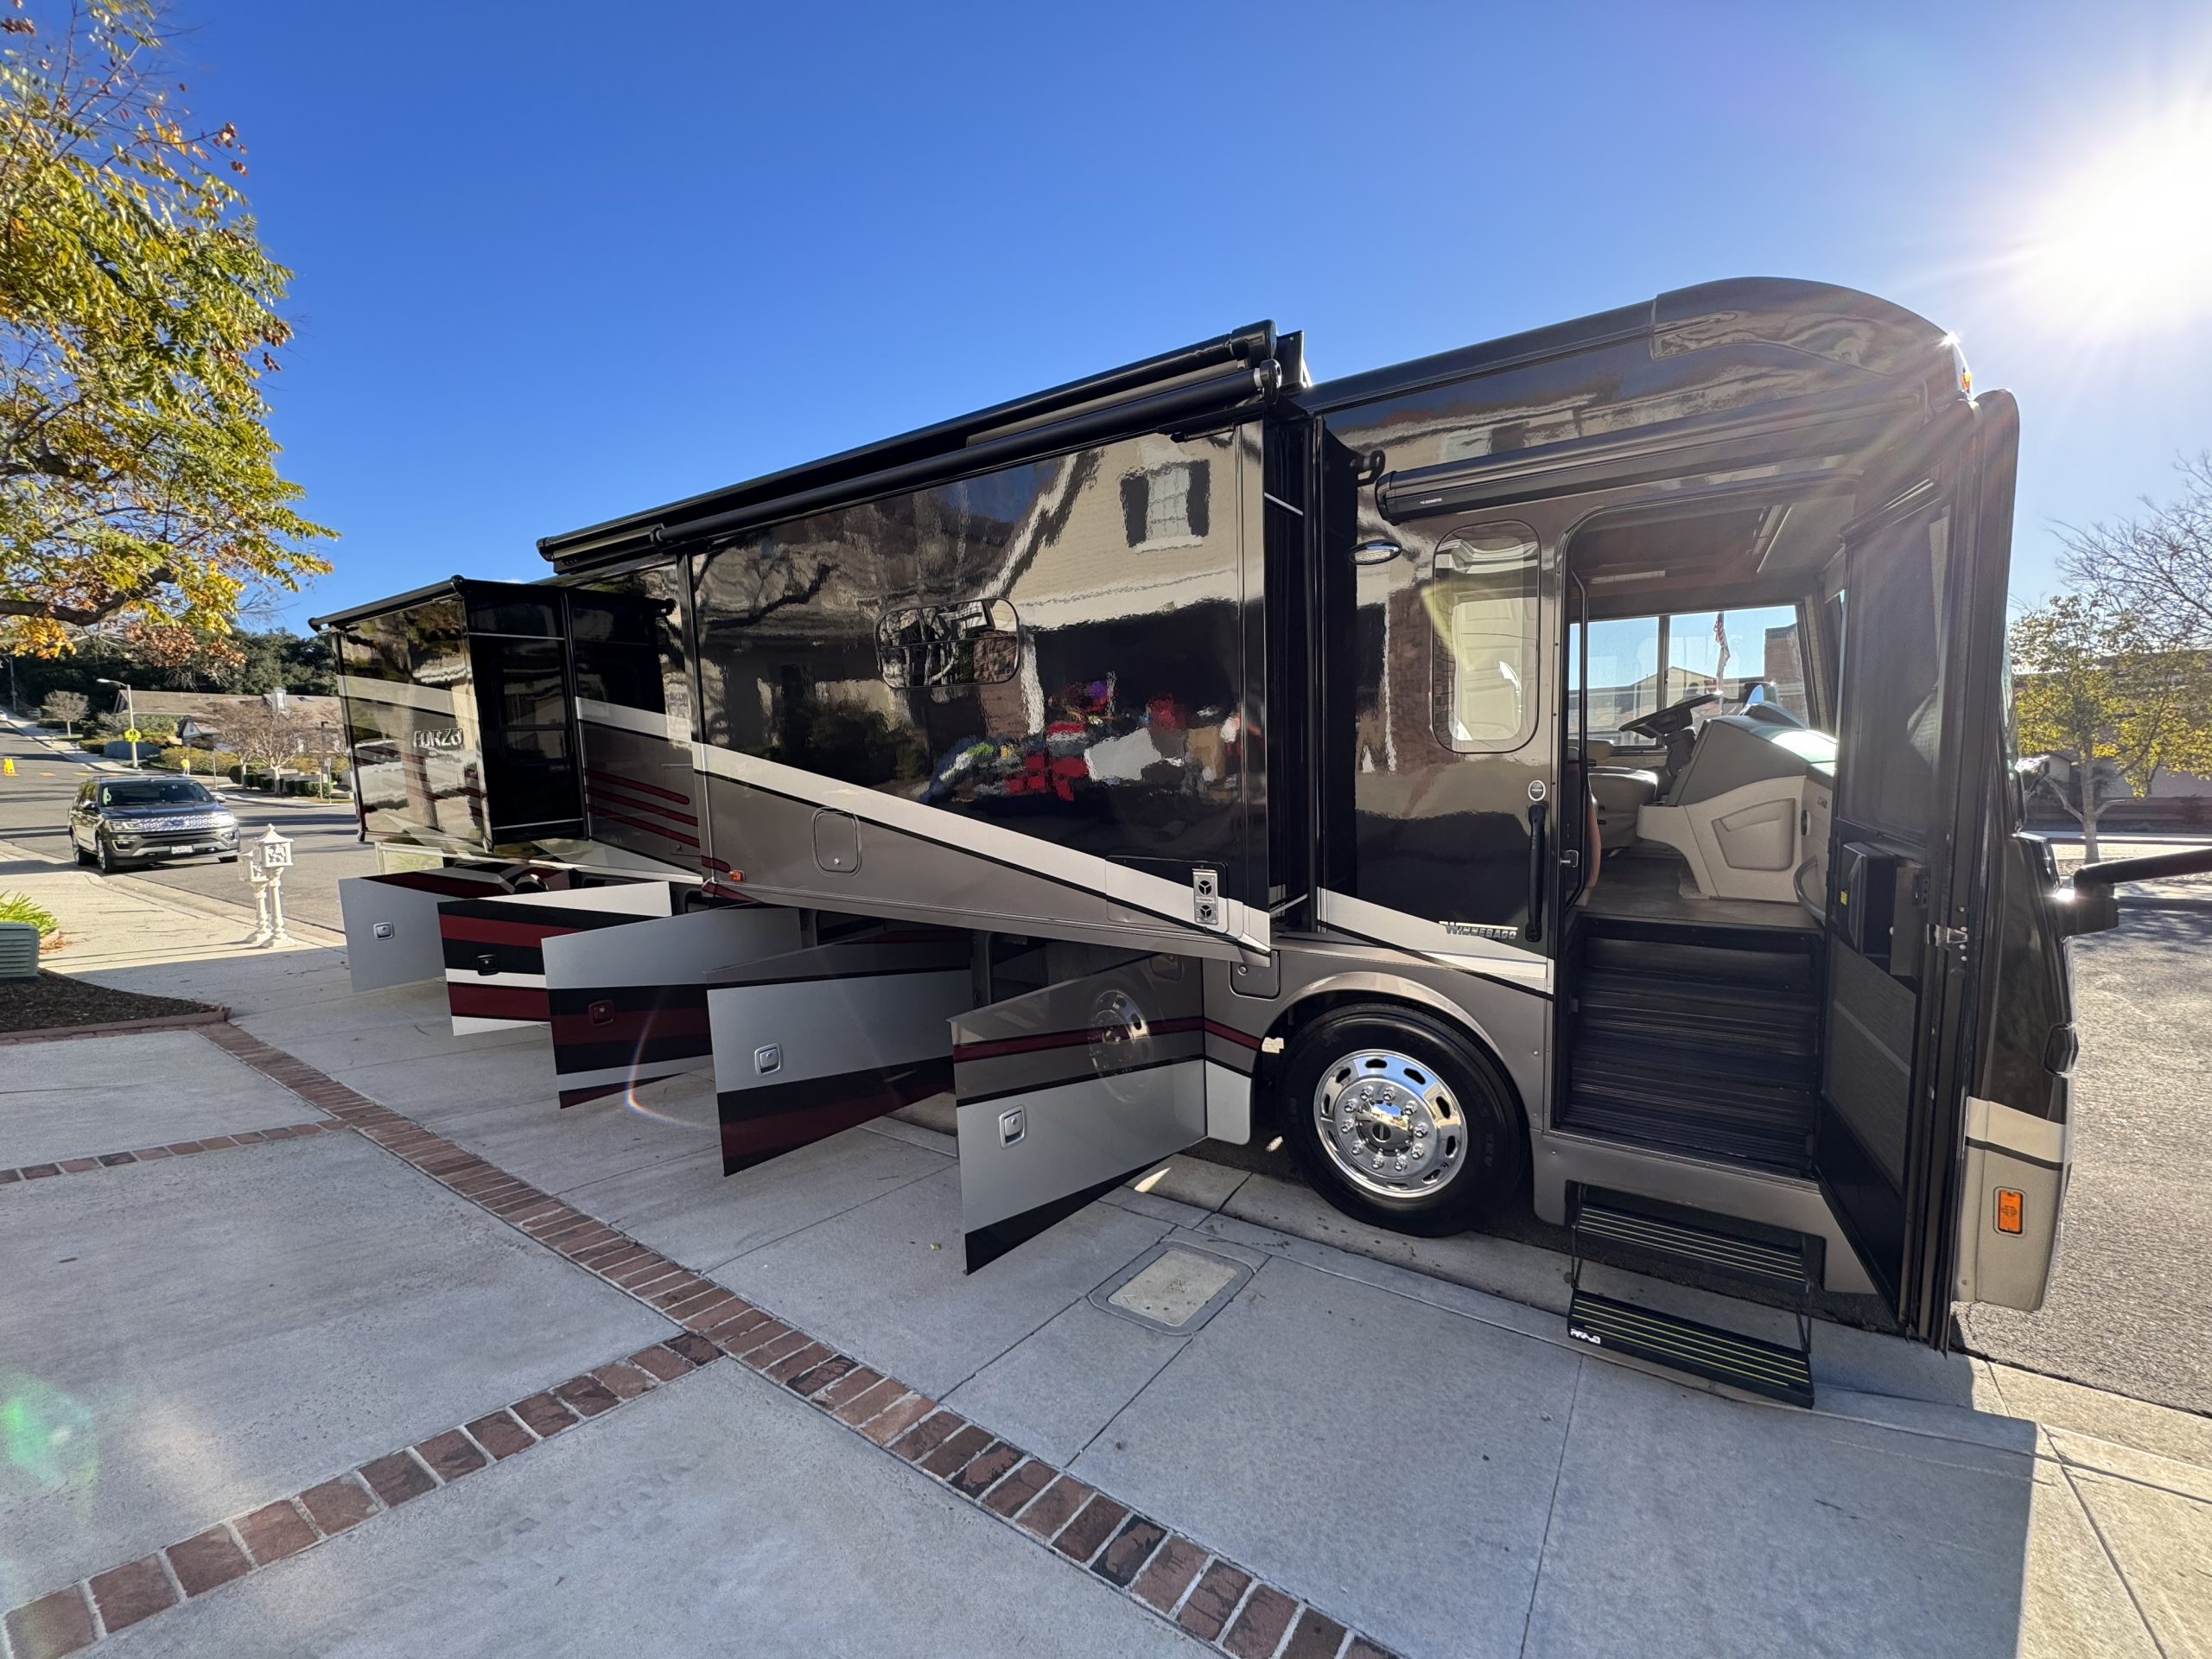 2019 Winnebago Forza 38F 12834 miles Equipped with a Freightliner XCS  Chassis, Cummins-ISB 6.7 340 HP engine, and Allison 2500MH 6-speed…